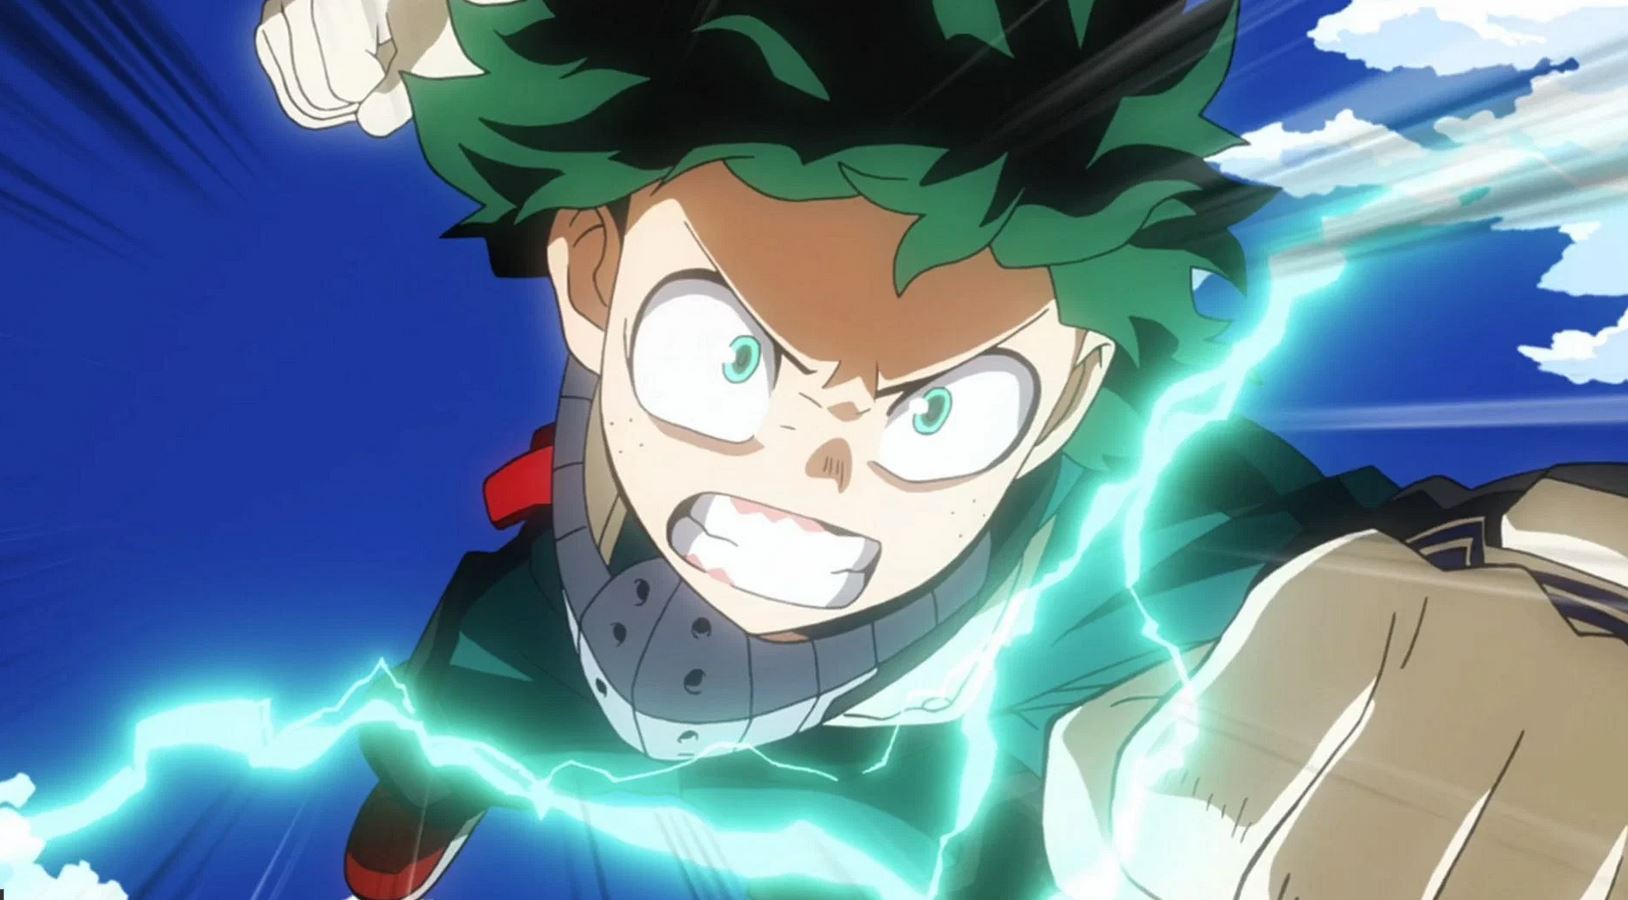 In the civilization in which Midoriya lives, practically everyone possesses superpowers, and being a celebrity is a respectable profession. 